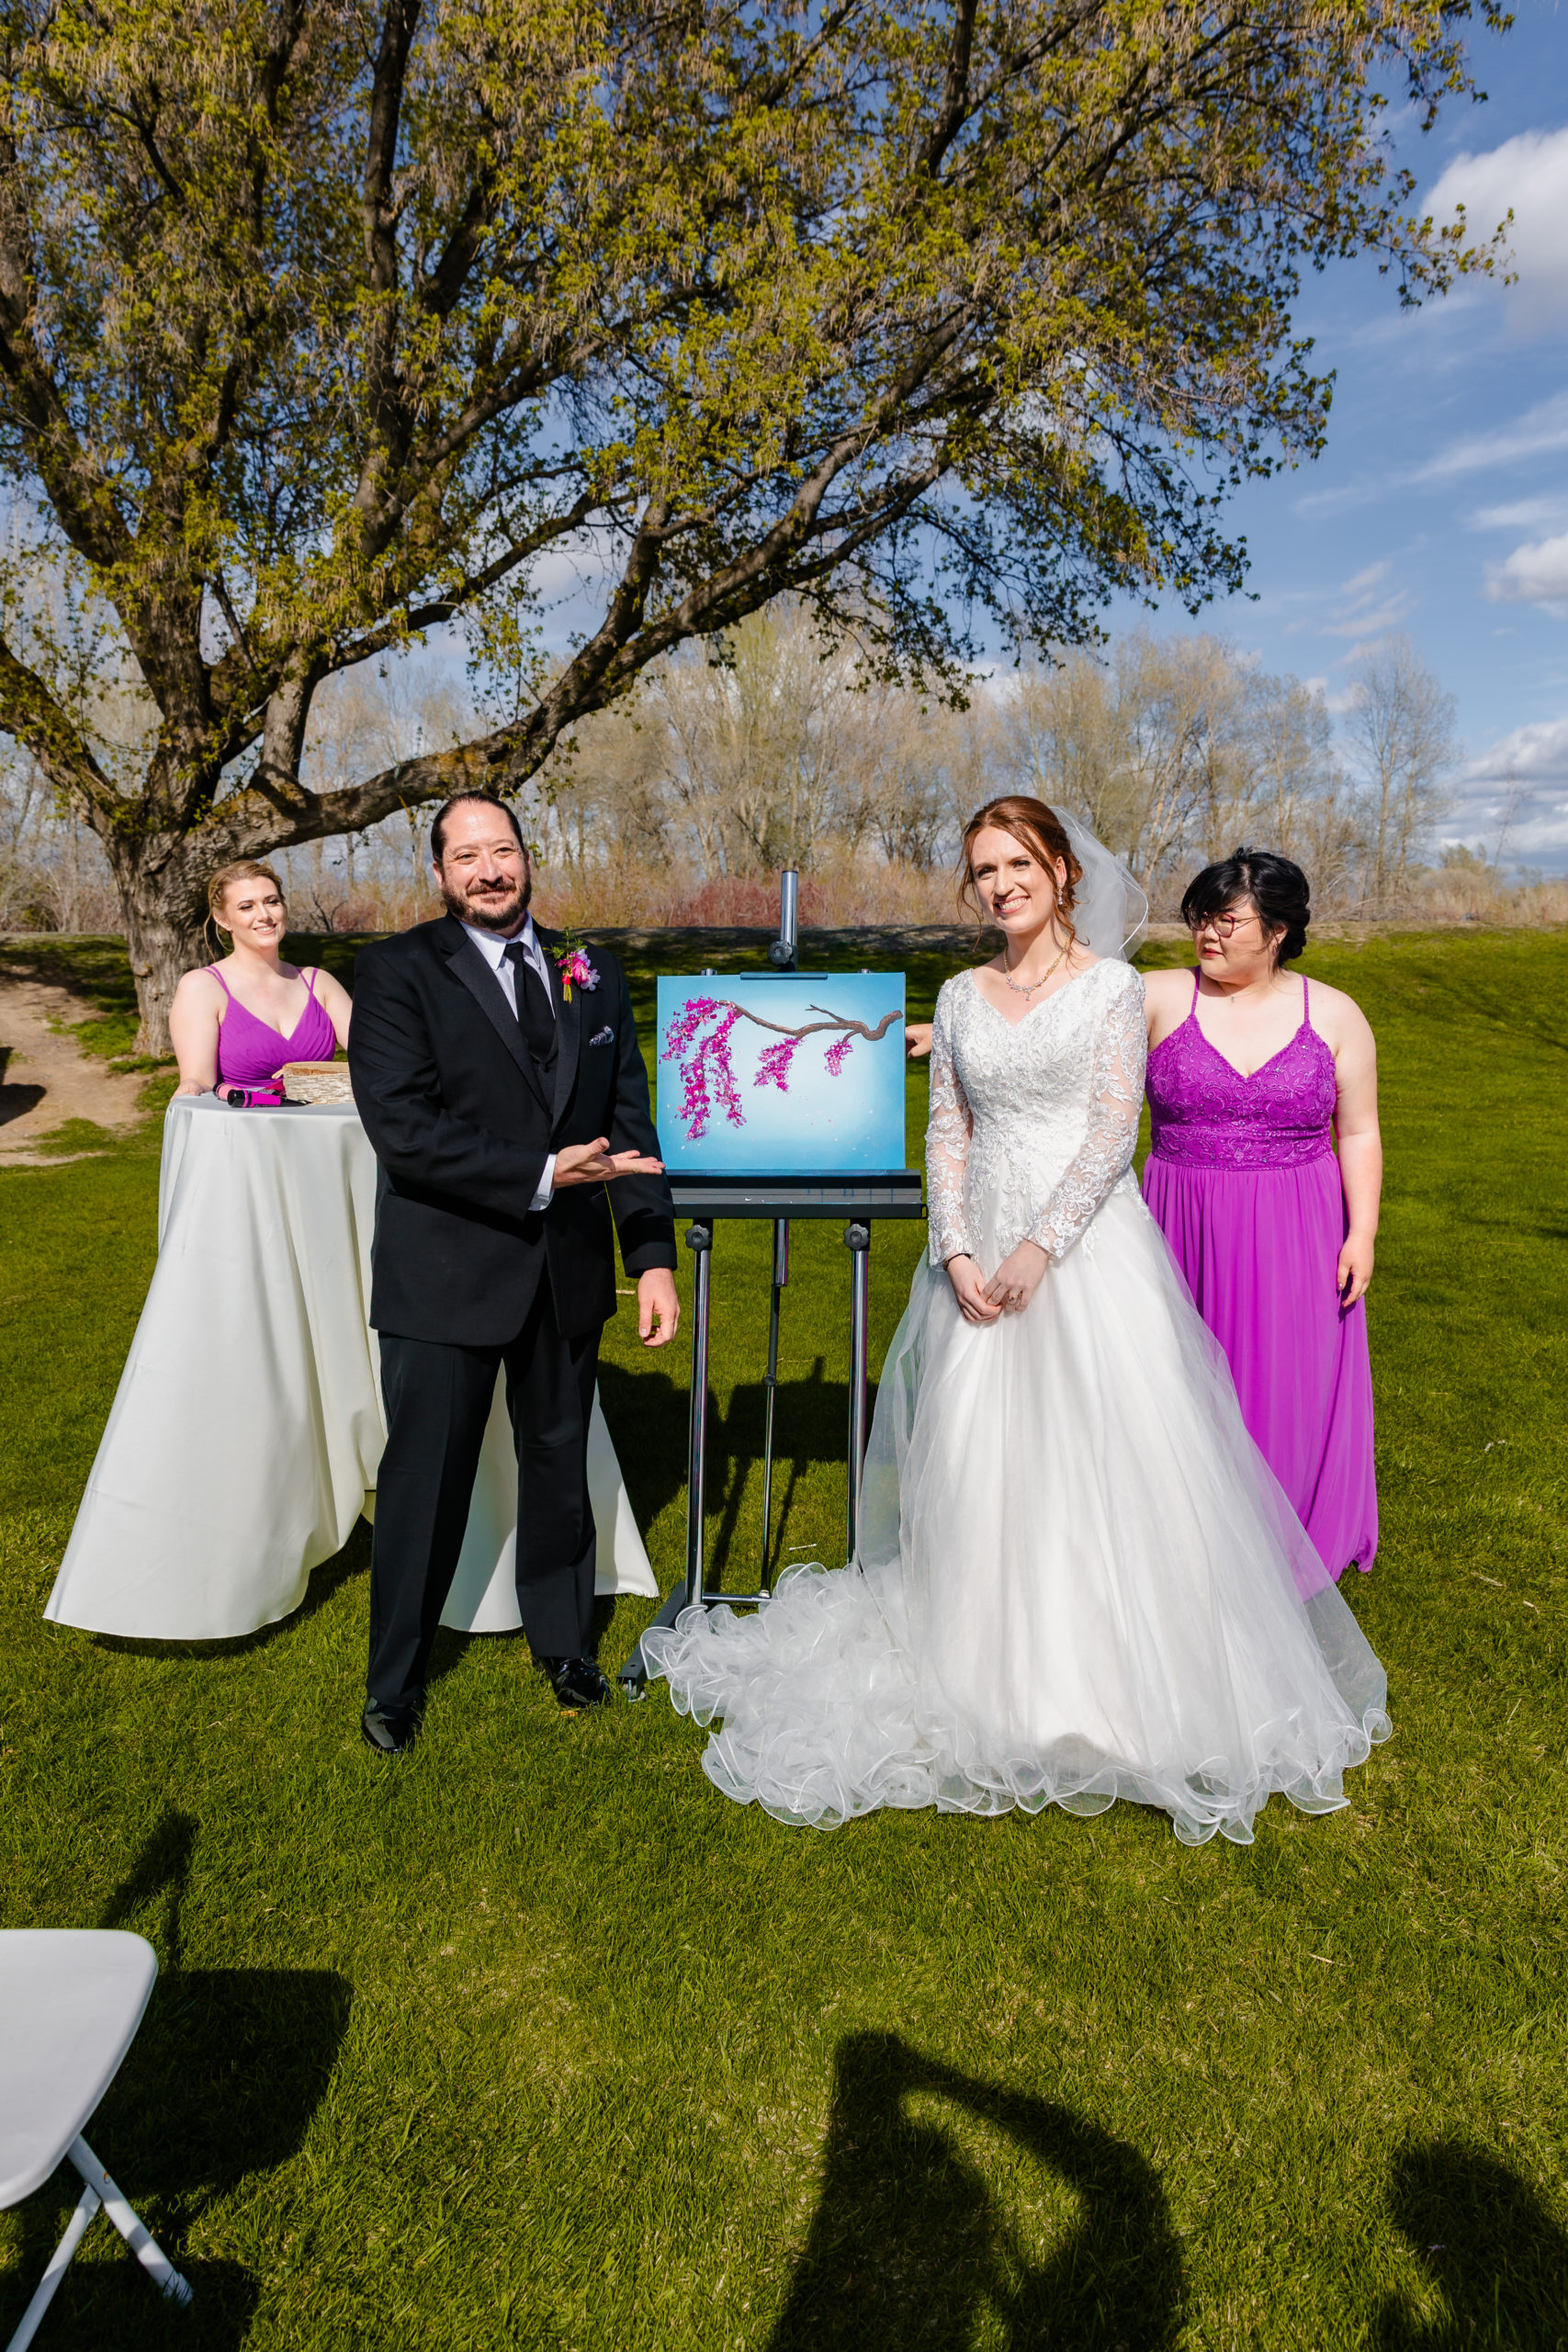 bride and groom display painting at their wedding ceremony of cherry blossoms on branch